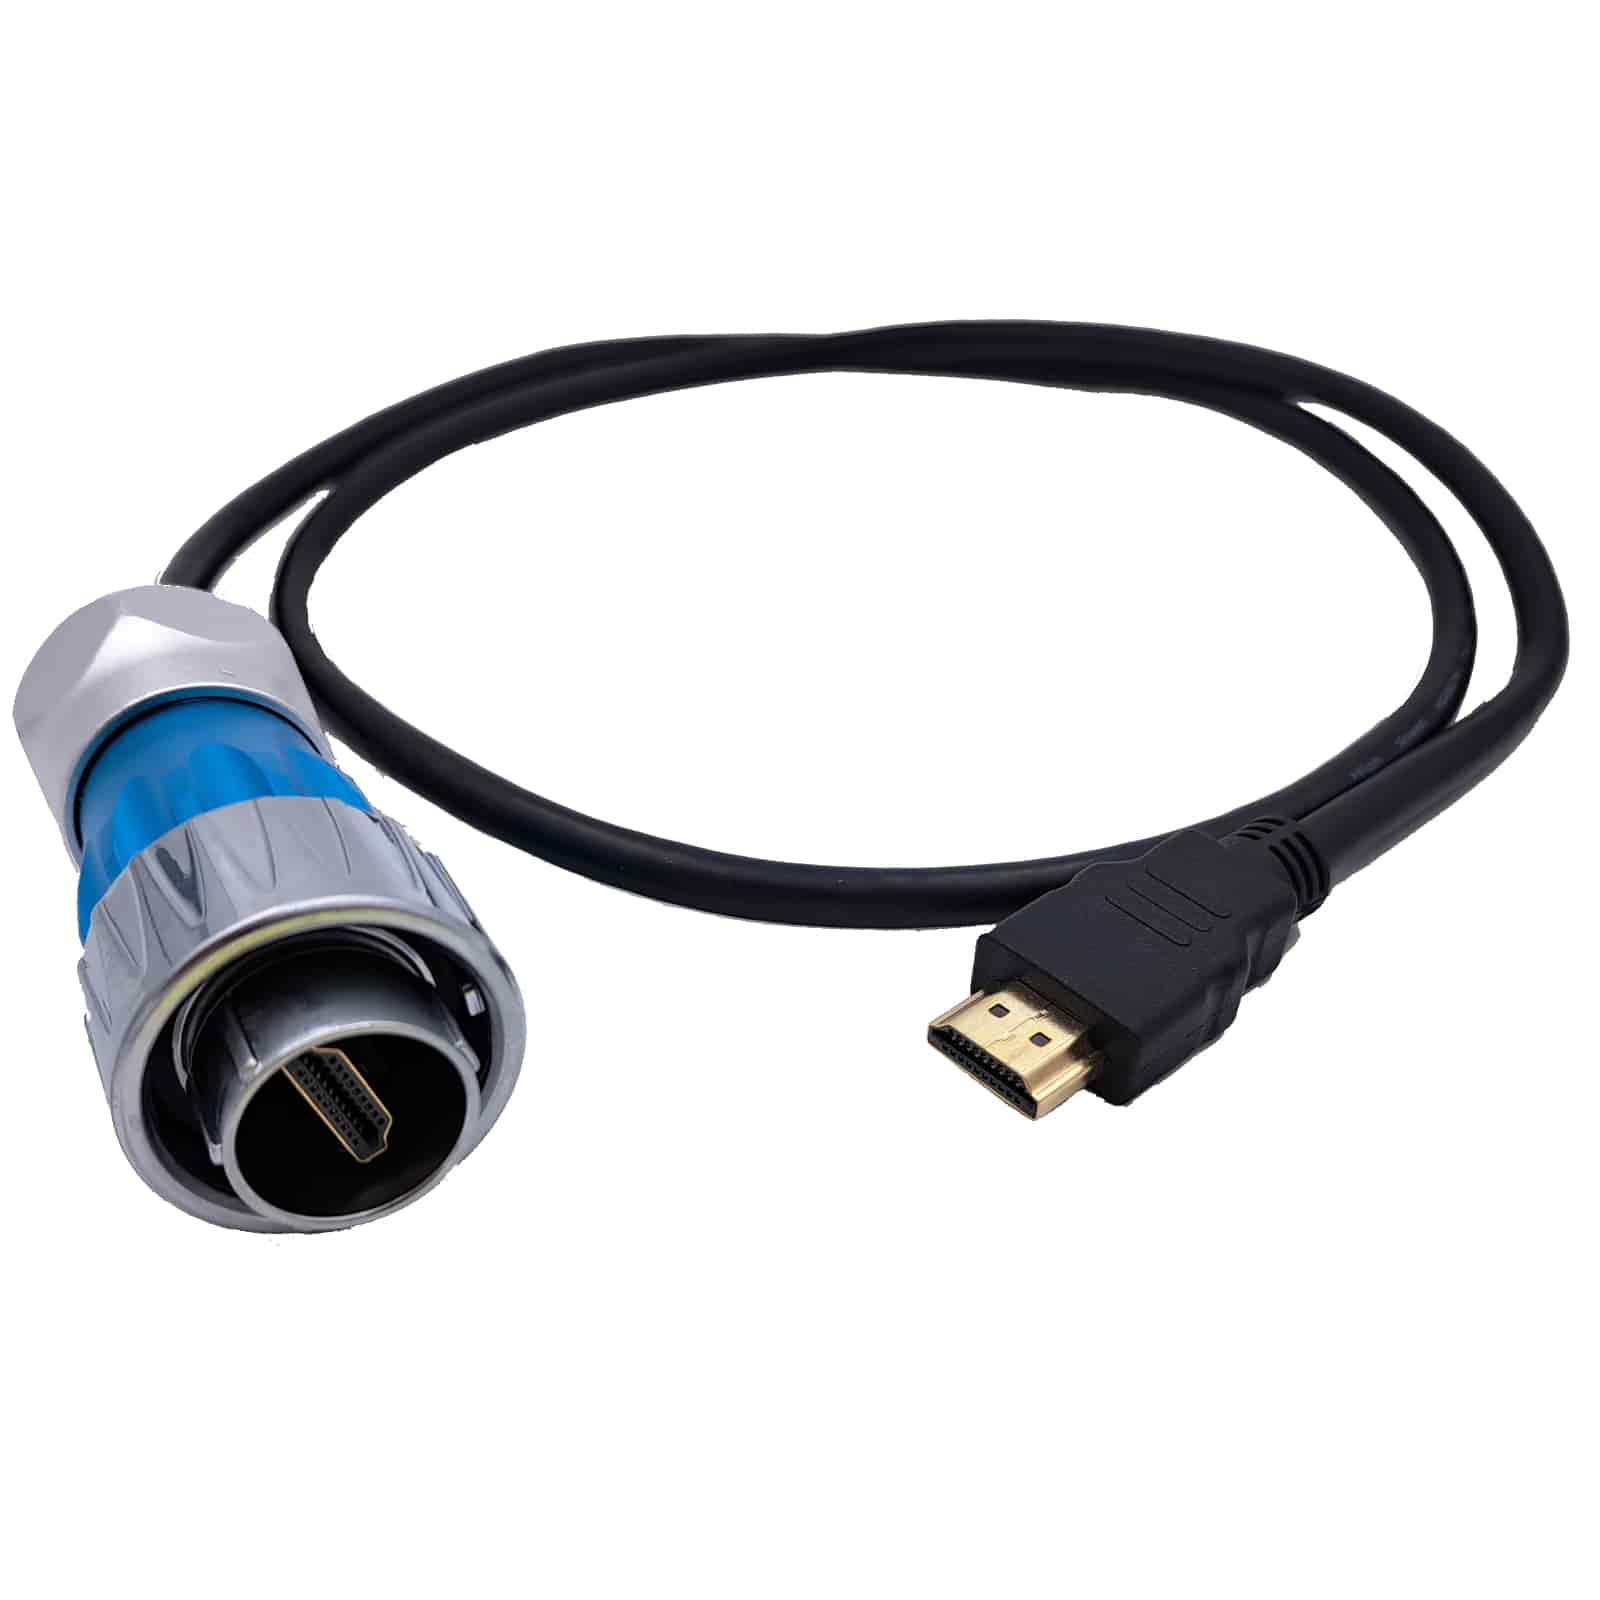 Voorbereiding hoek kunst CNLINKO DH-24 Series Cable Connector HDMI 1 m | ENOVA Solutions AG  Connectors & Cables Switzerland